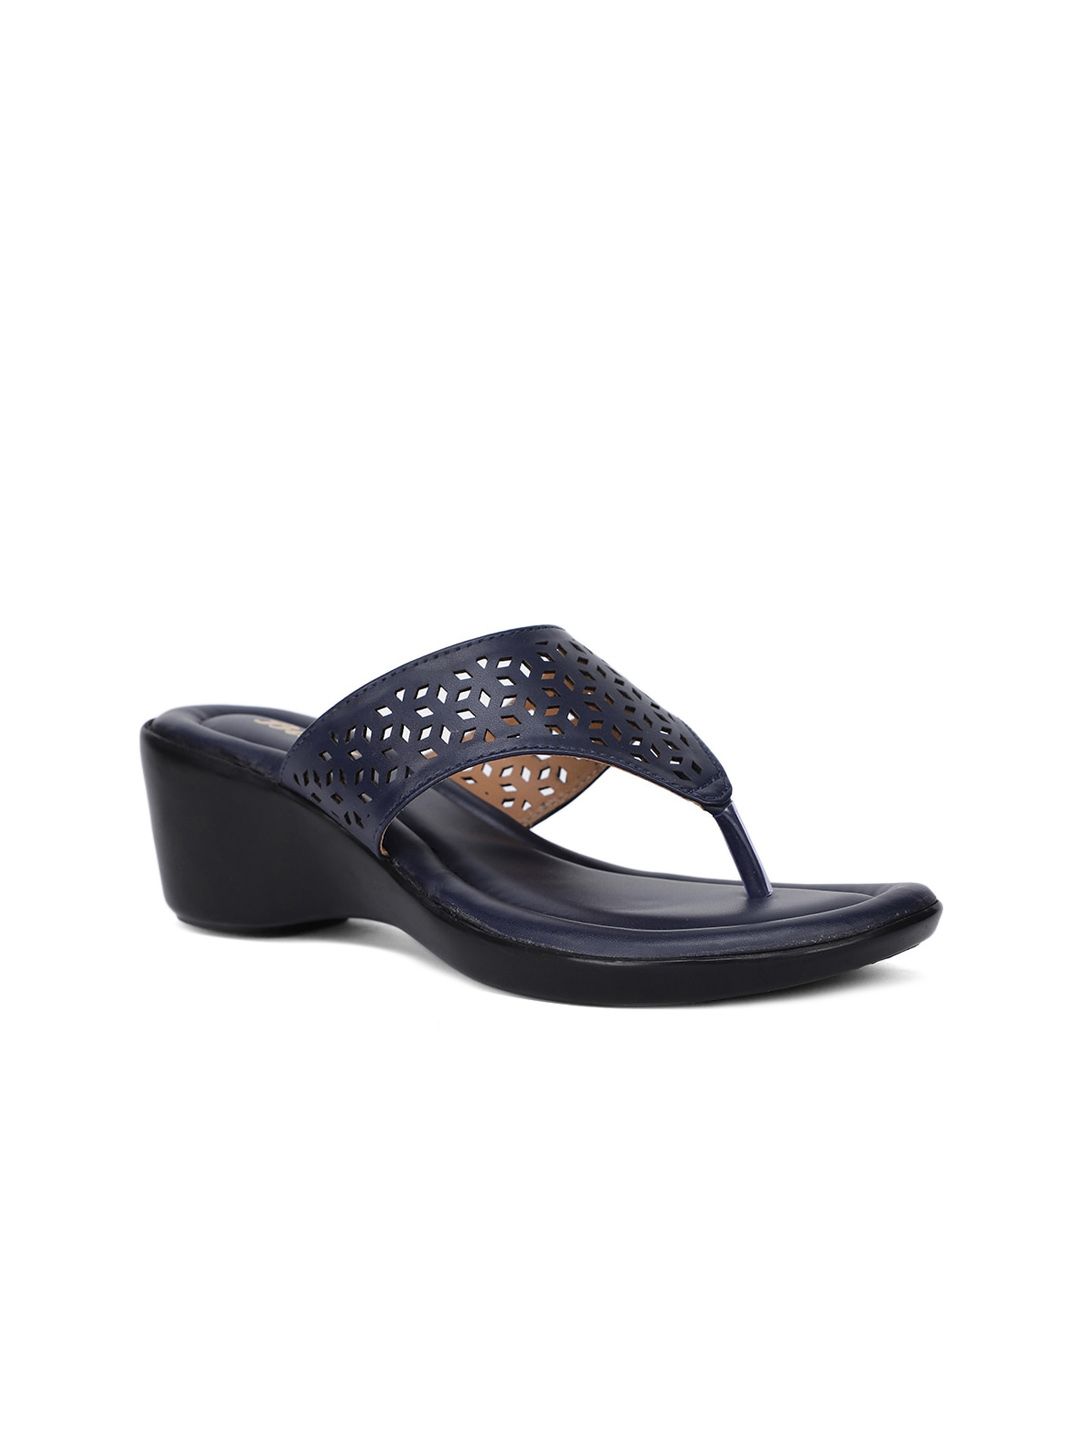 Bata Blue Wedge Sandals with Laser Cuts Price in India